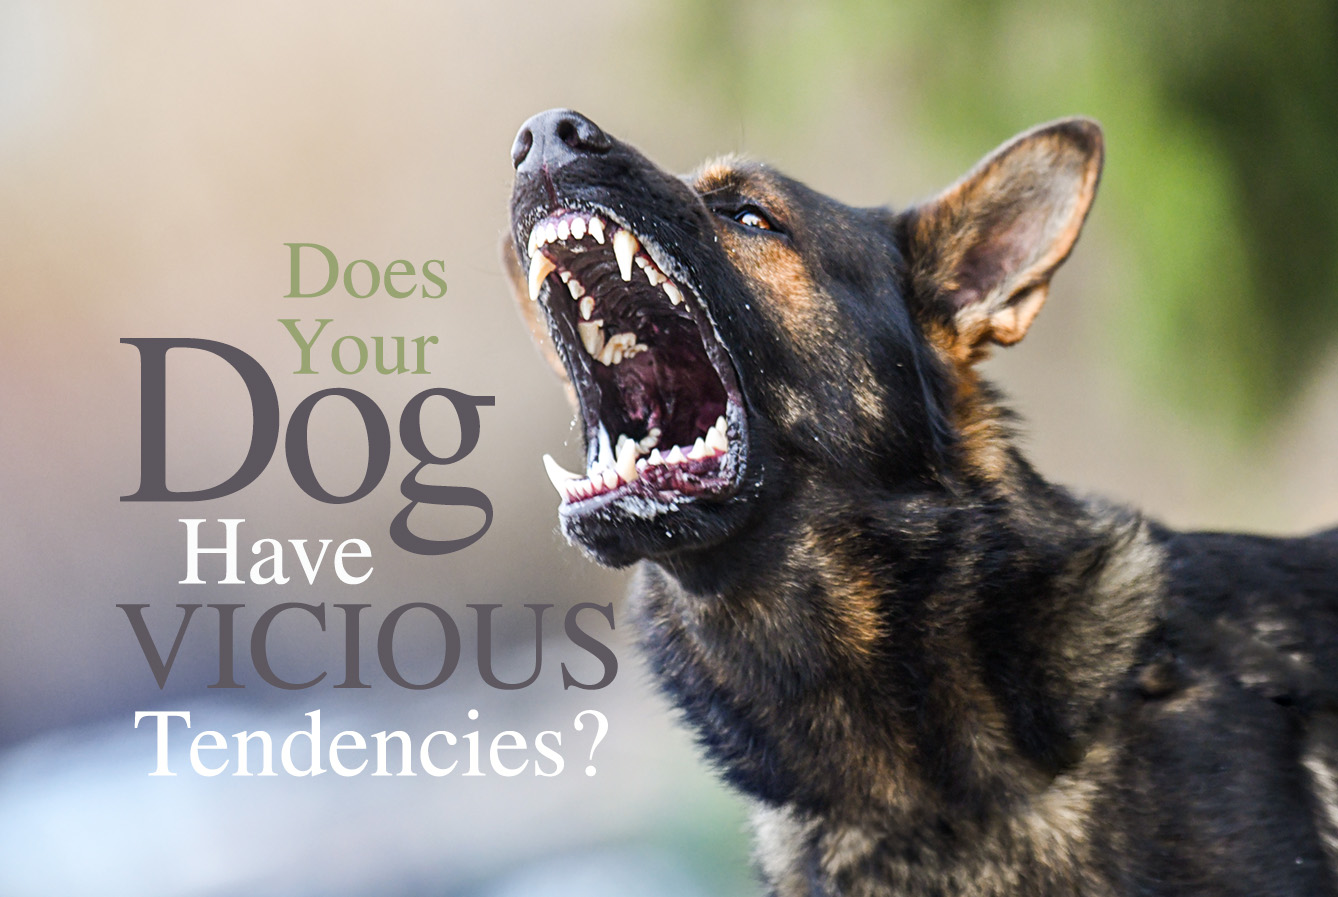 Does Your Dog have Vicious Tendencies